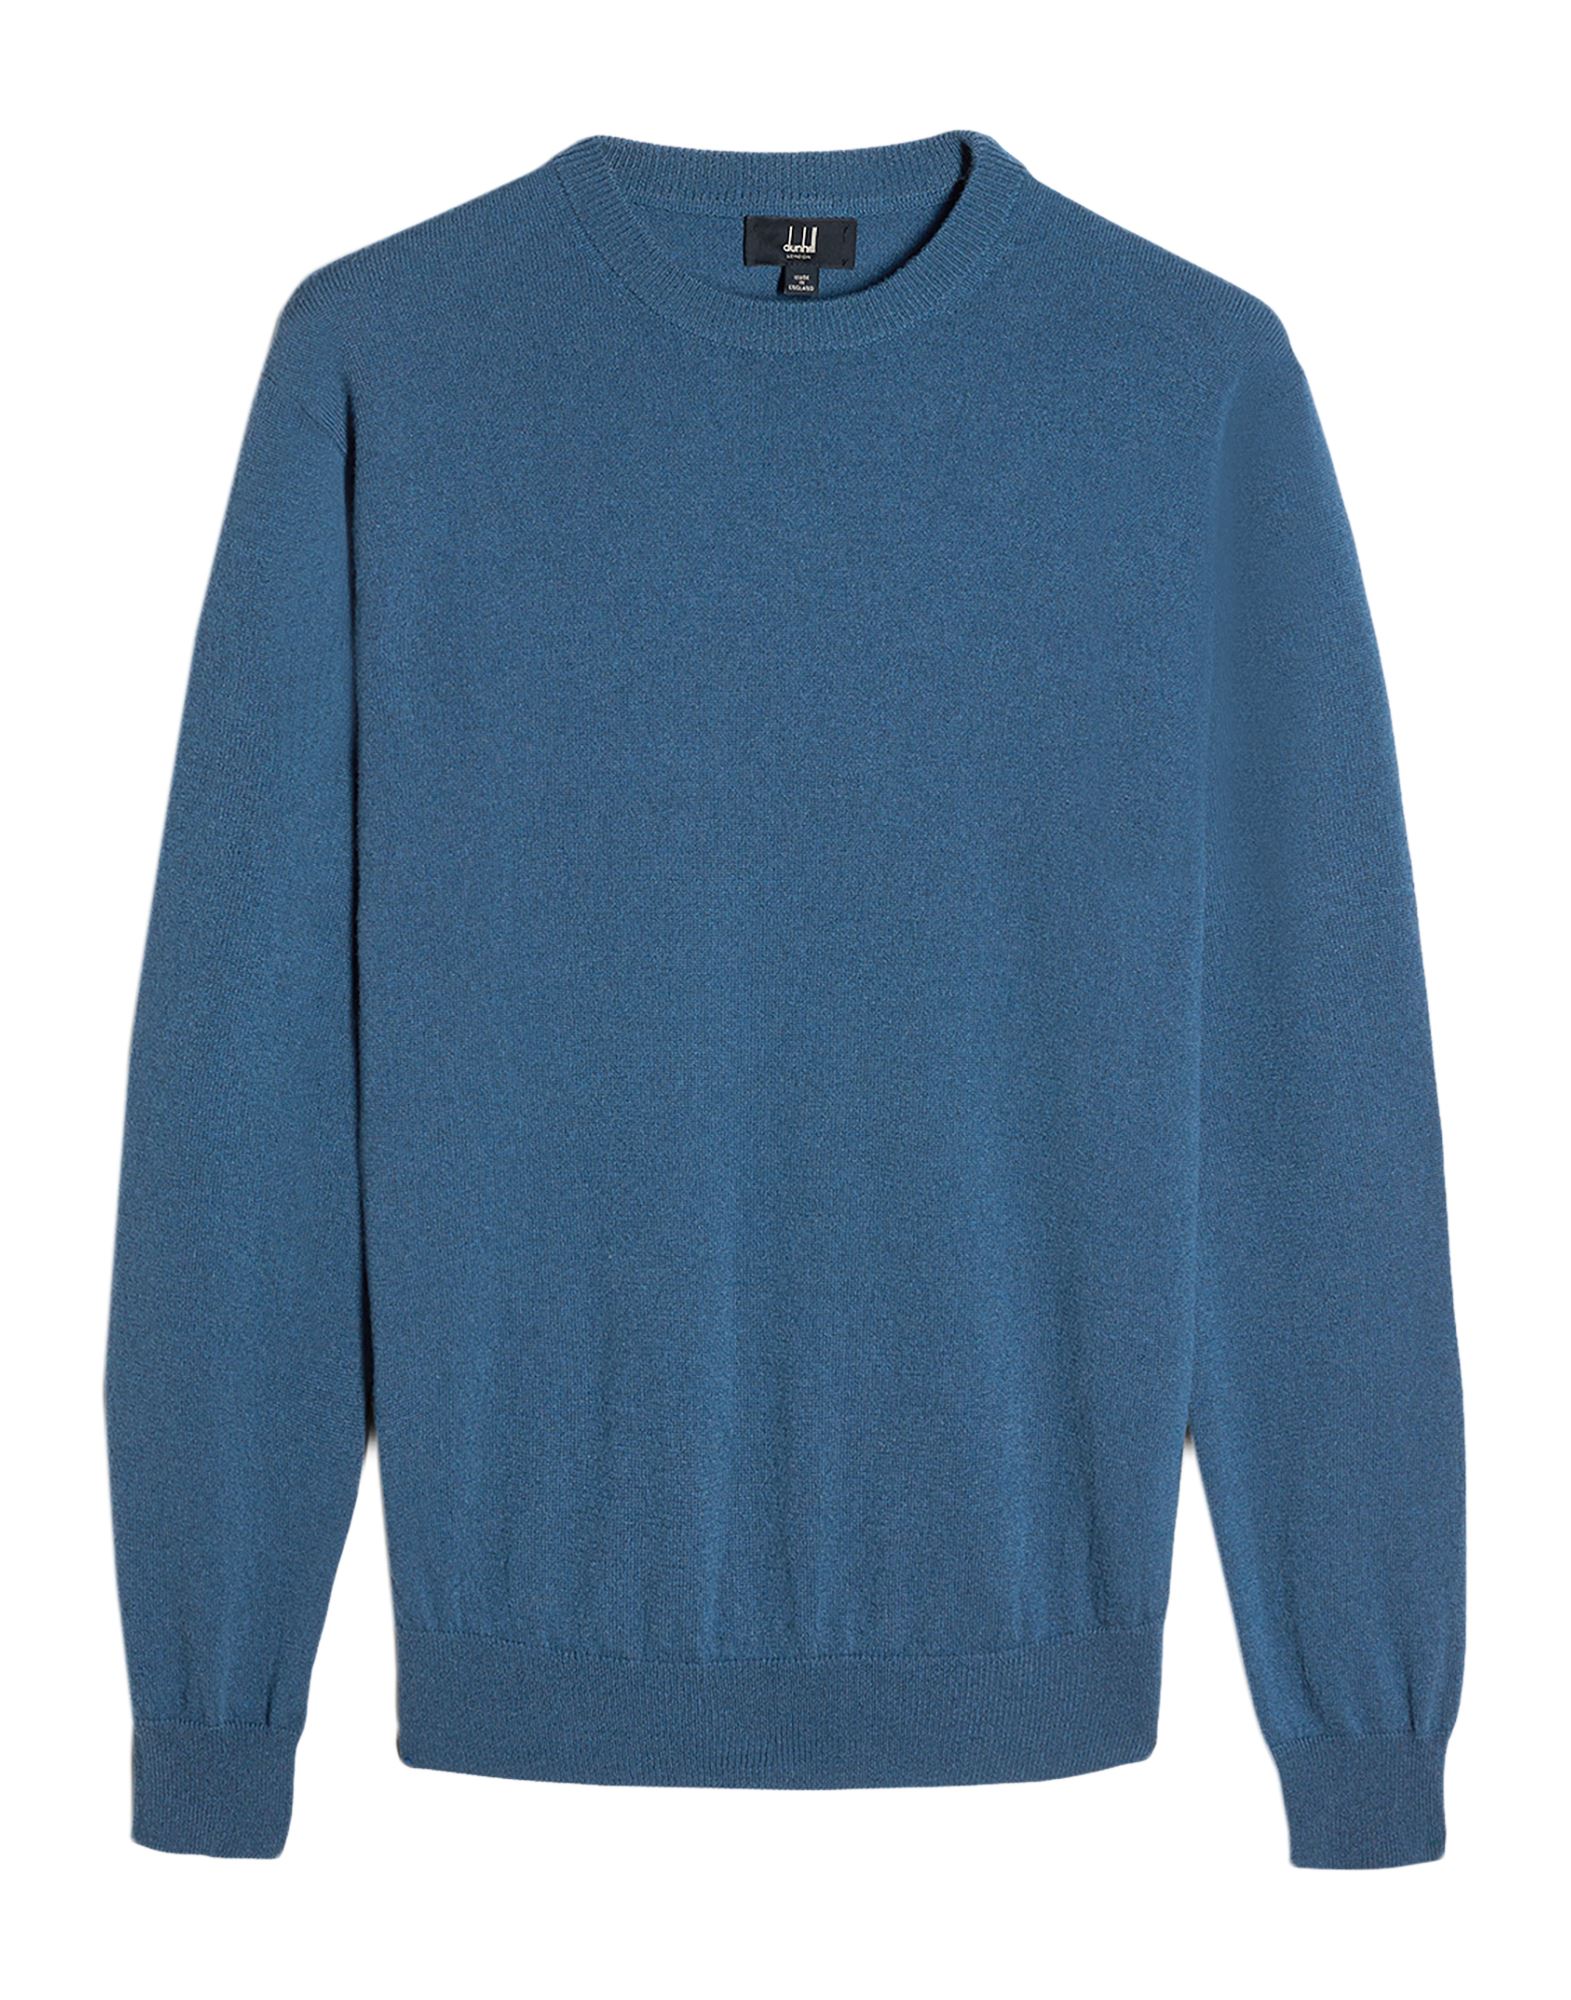 DUNHILL DUNHILL MAN SWEATER SLATE BLUE SIZE L CASHMERE